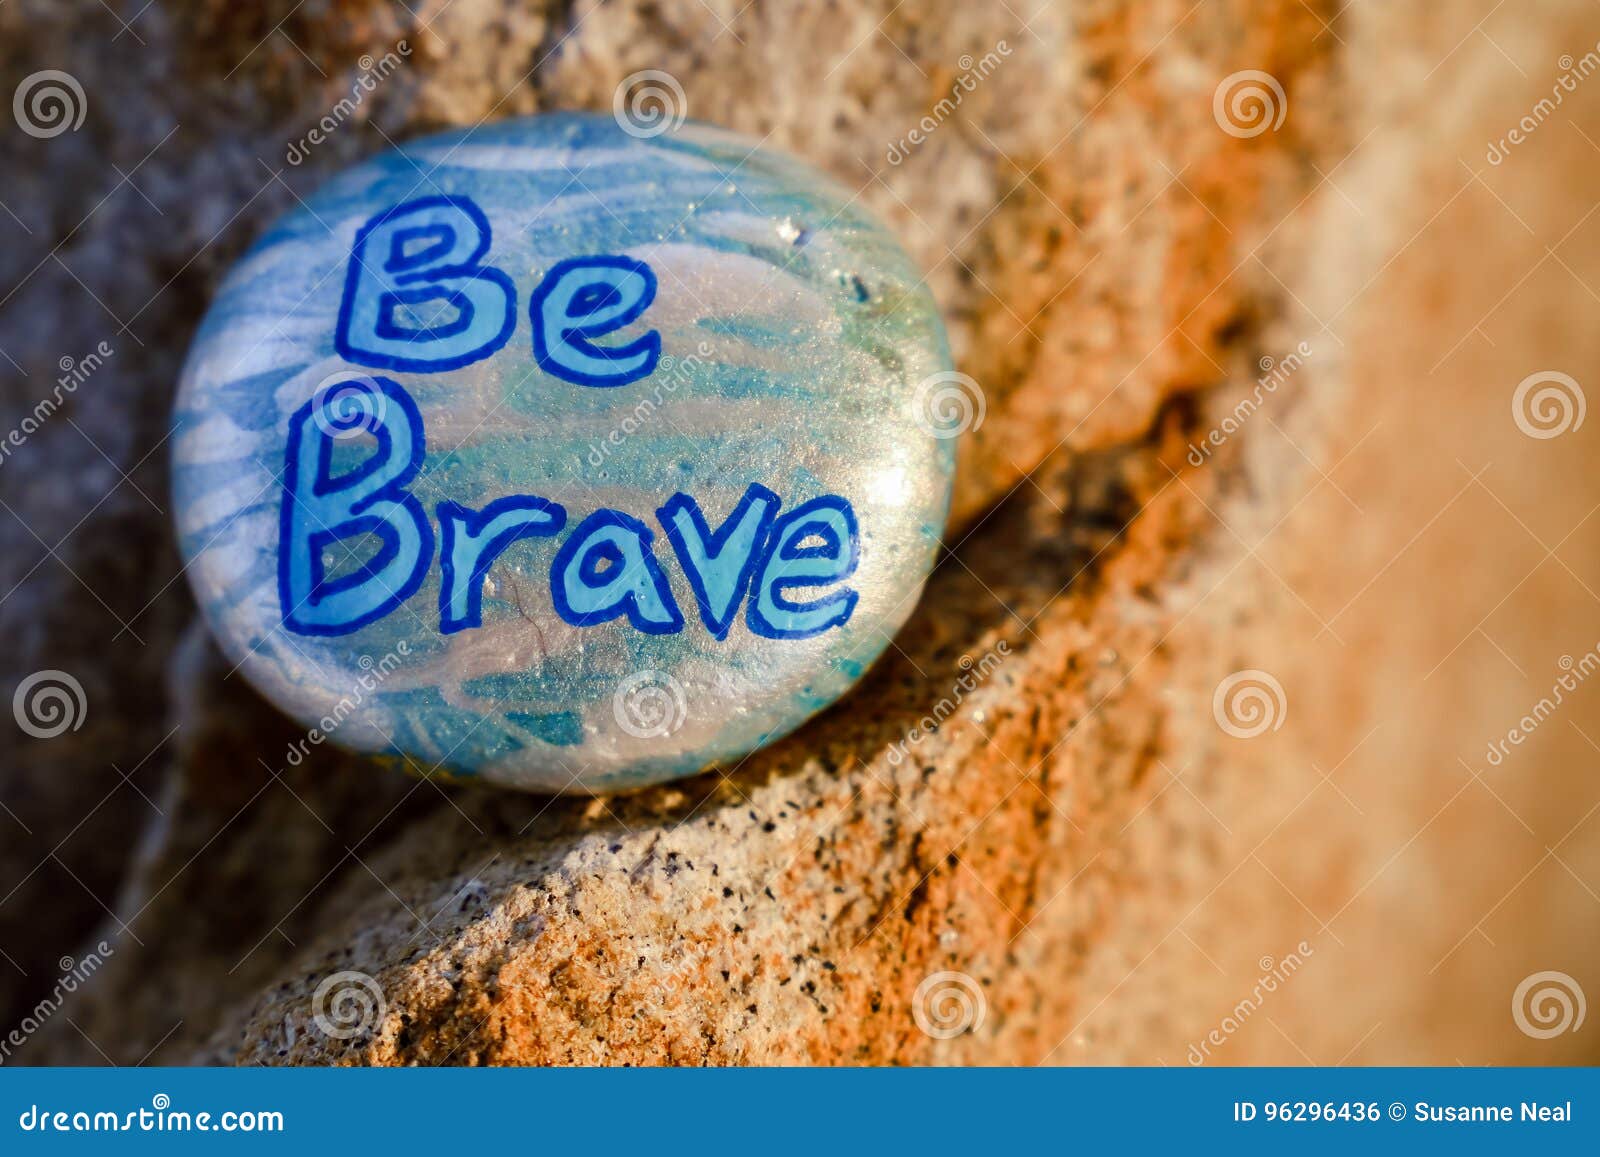 a rock painted silver and light blue stating be brave